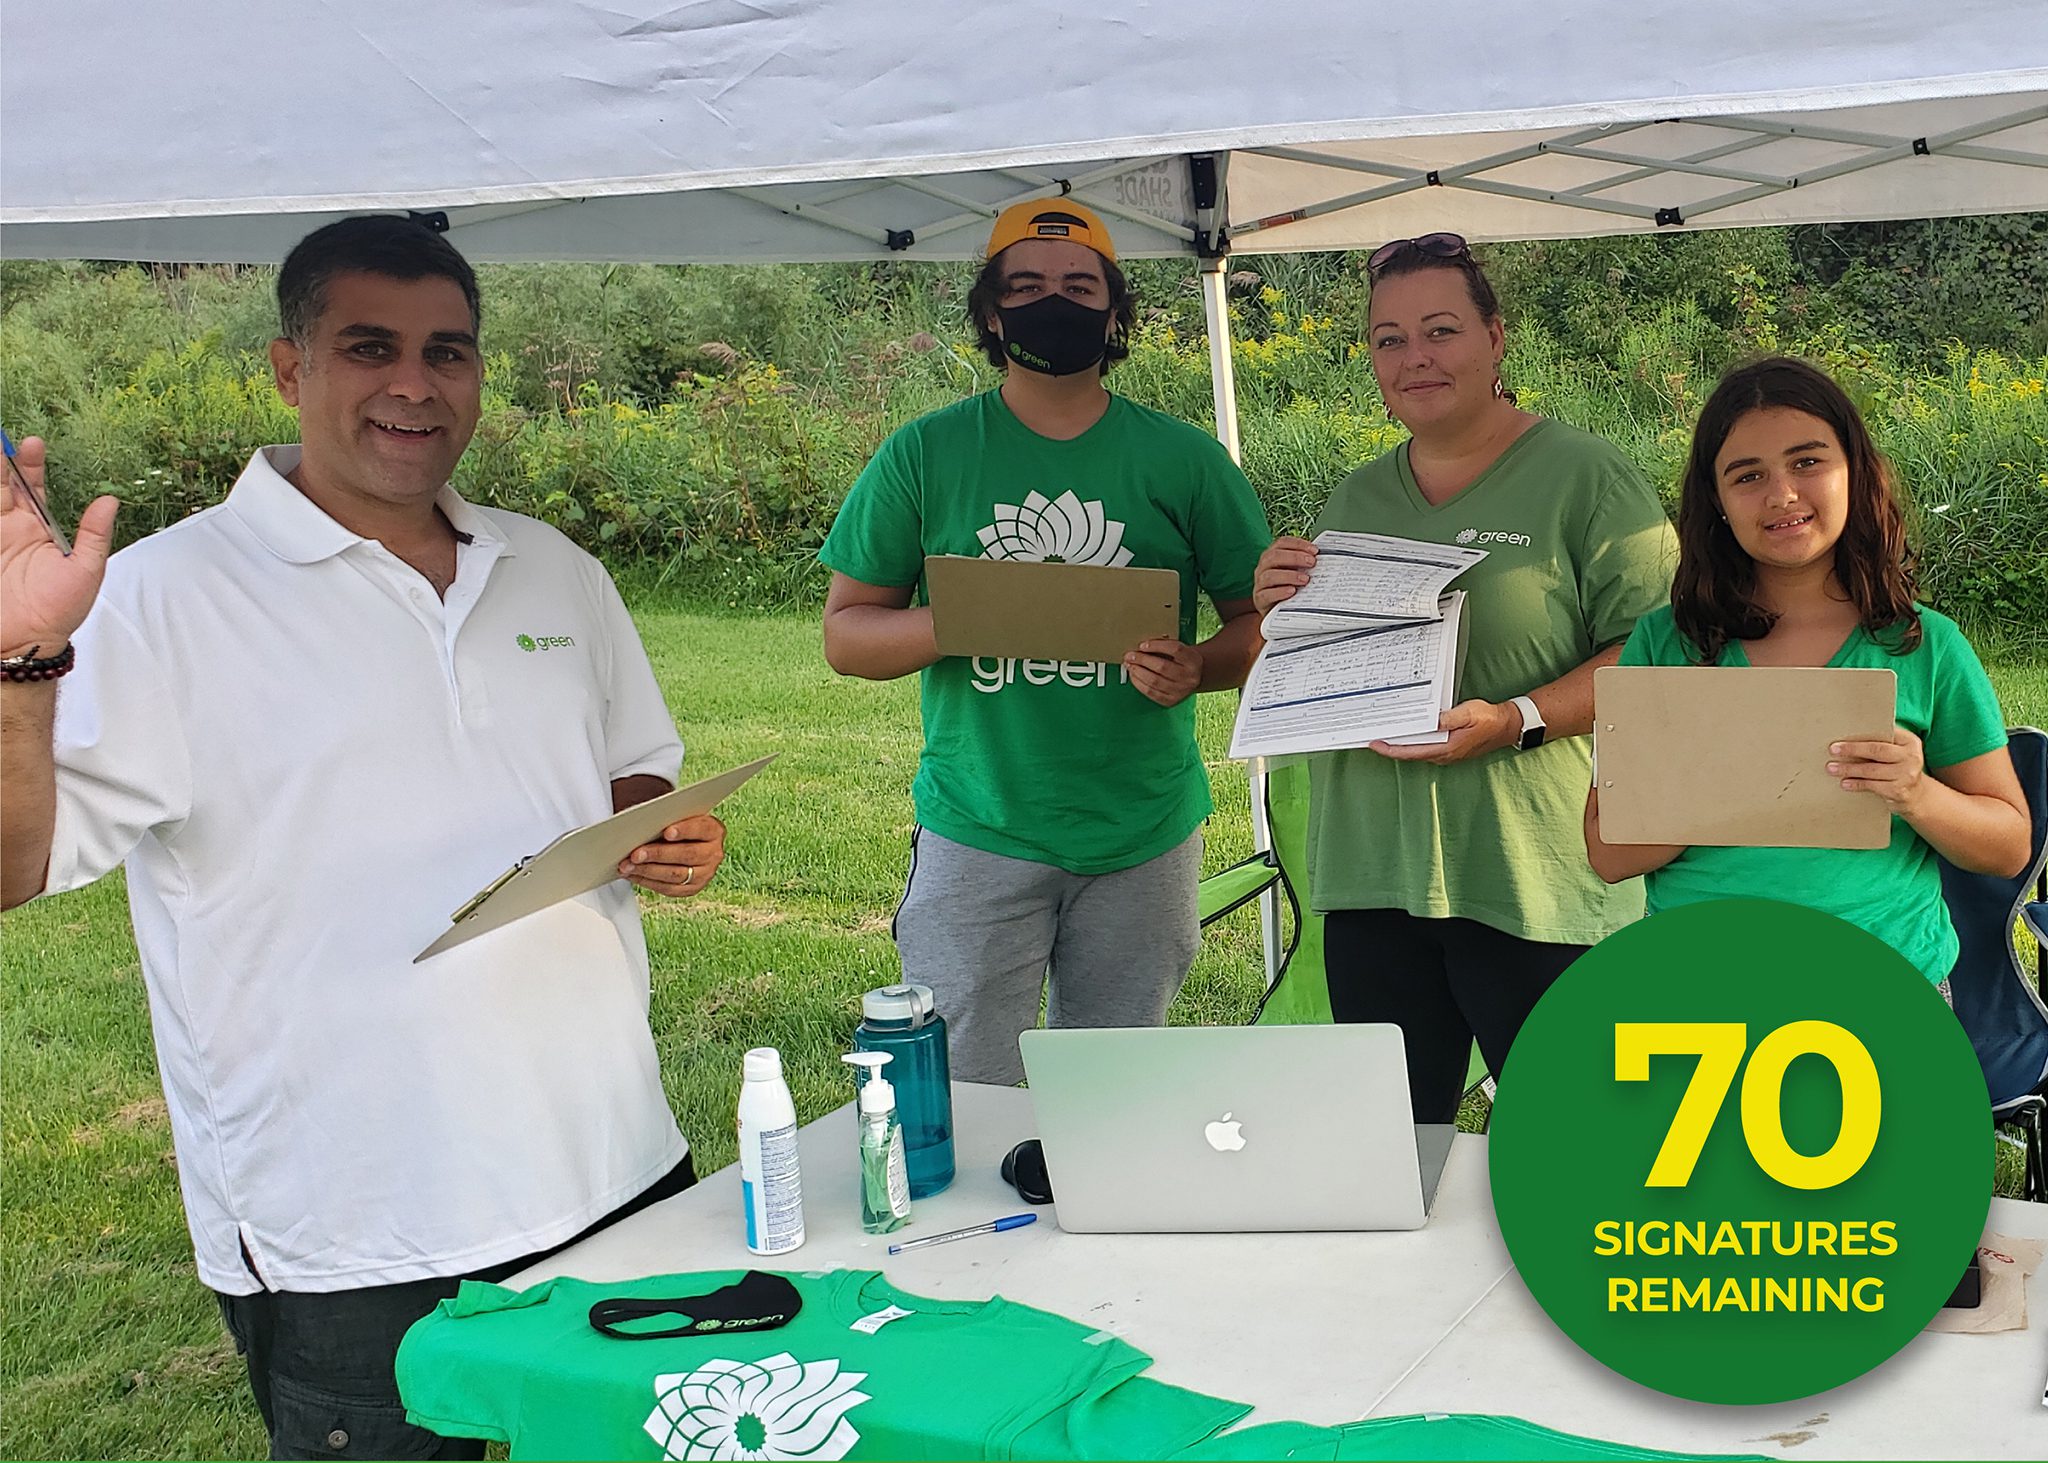 Bruno Sous 2021 Green Party Candidate - 70 Signatures Remaining